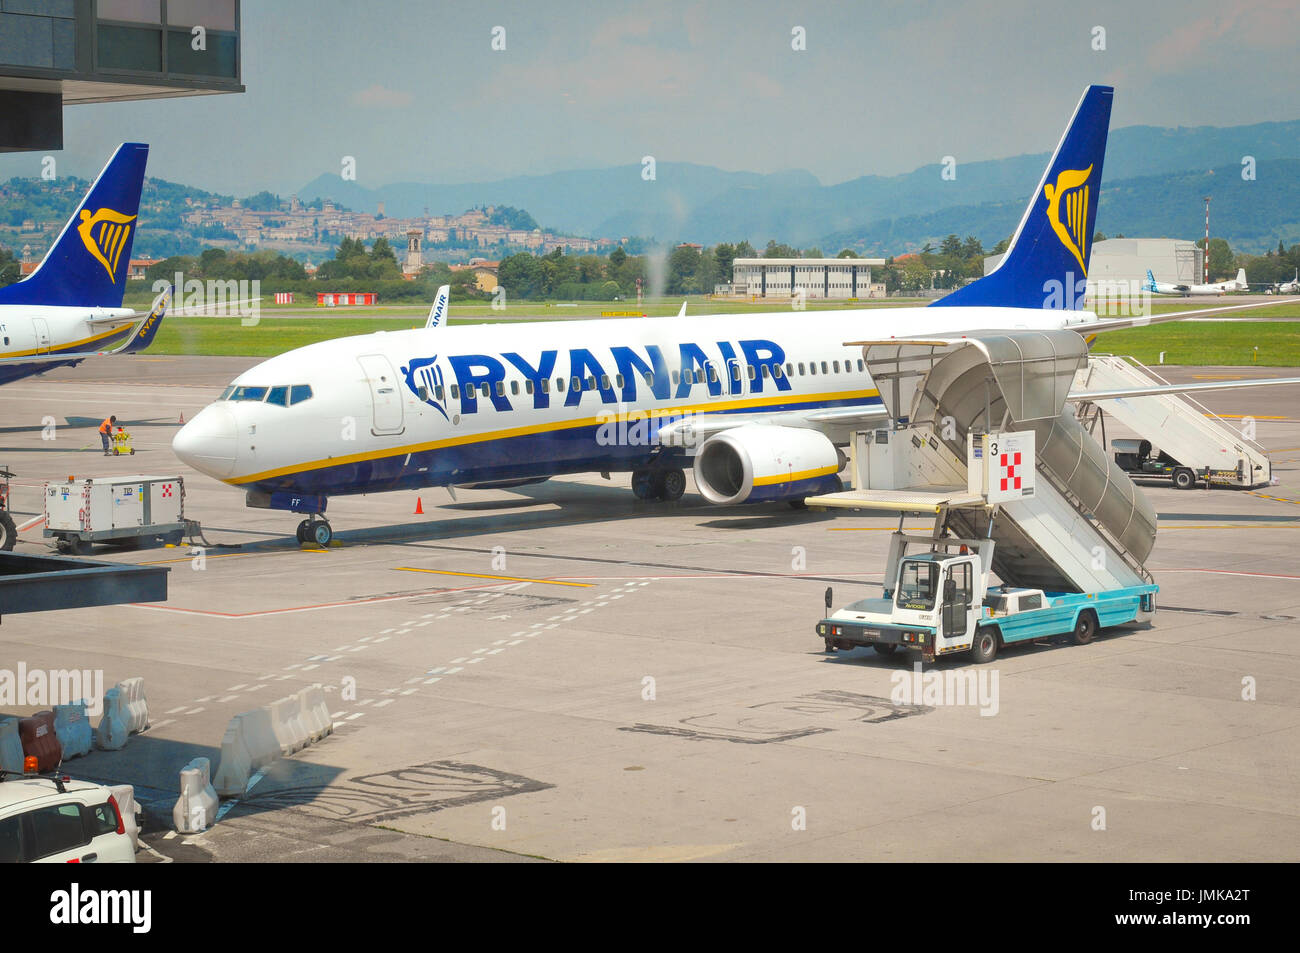 Milan, Italy - June 29, 2016: A Ryanair flight is preparing to take off from Bargamo Airport in Milan, Italy. Stock Photo